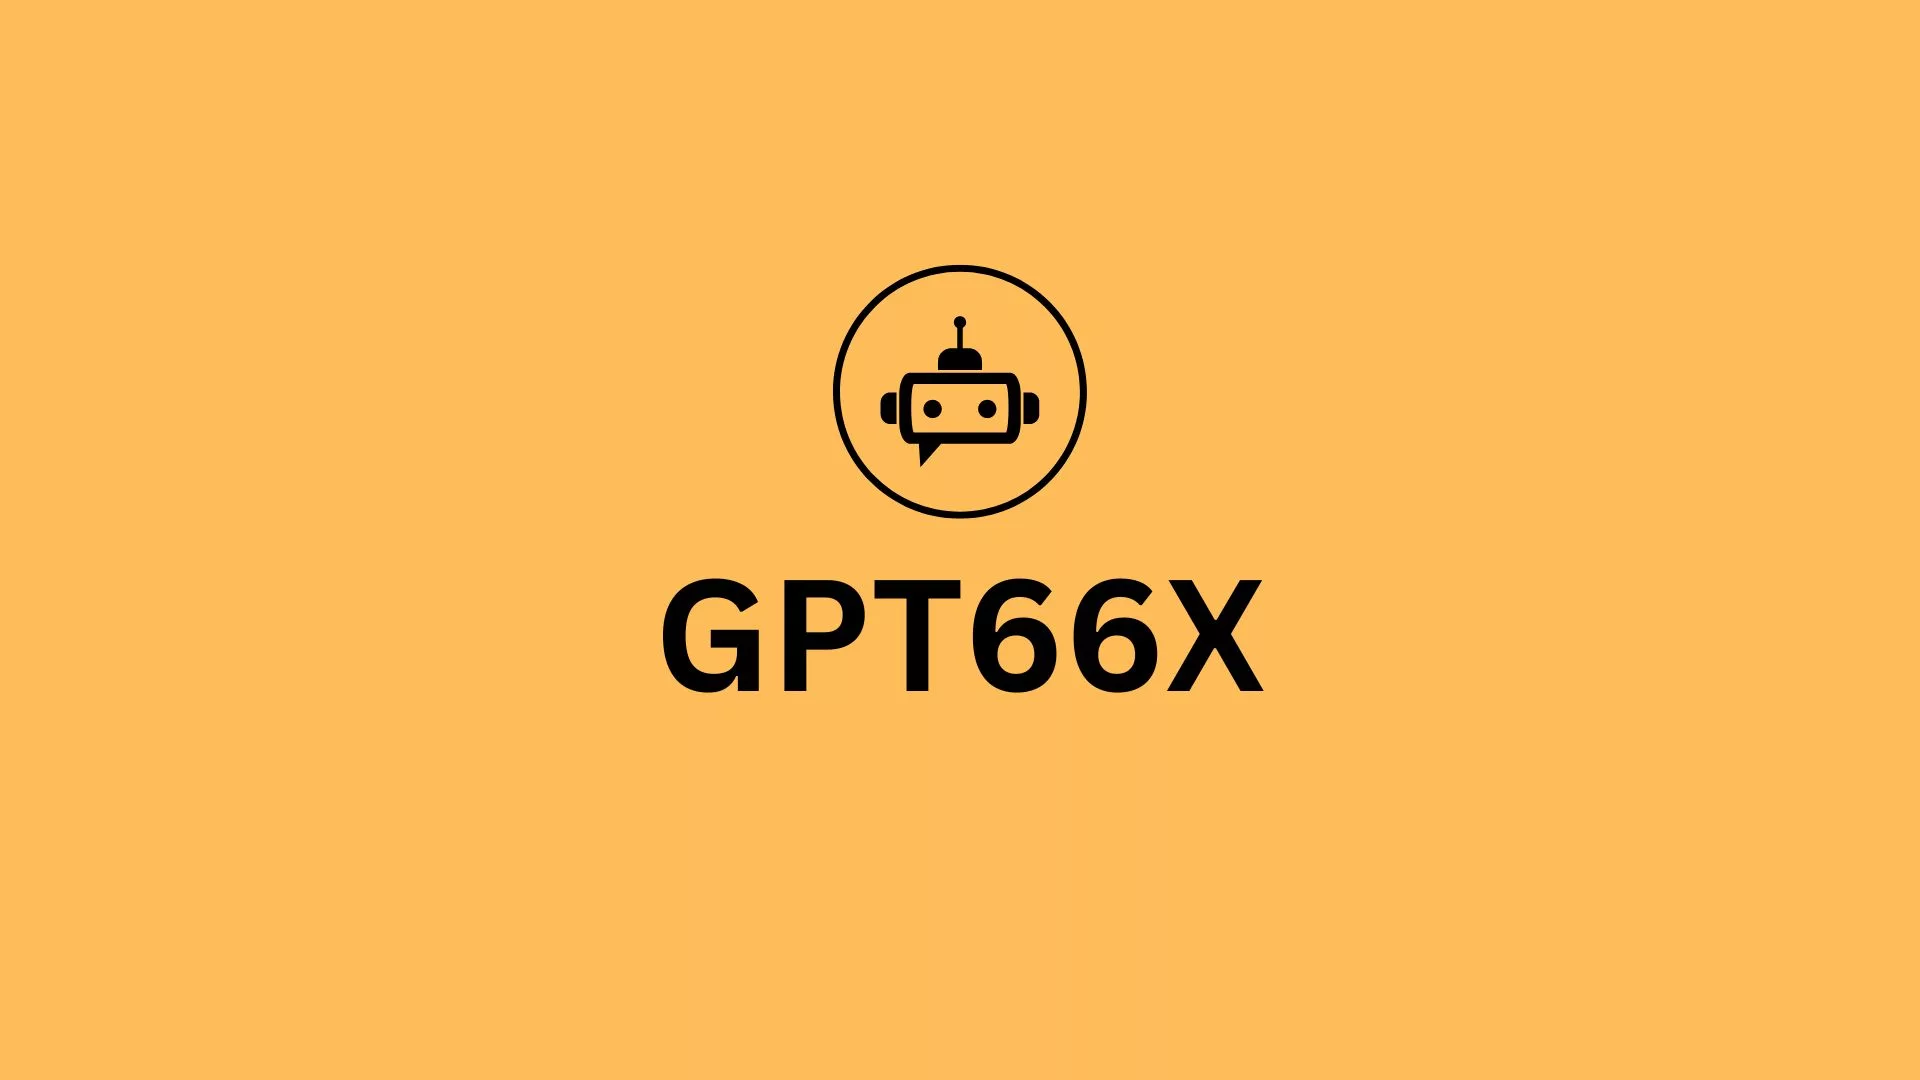 What is GPT66X